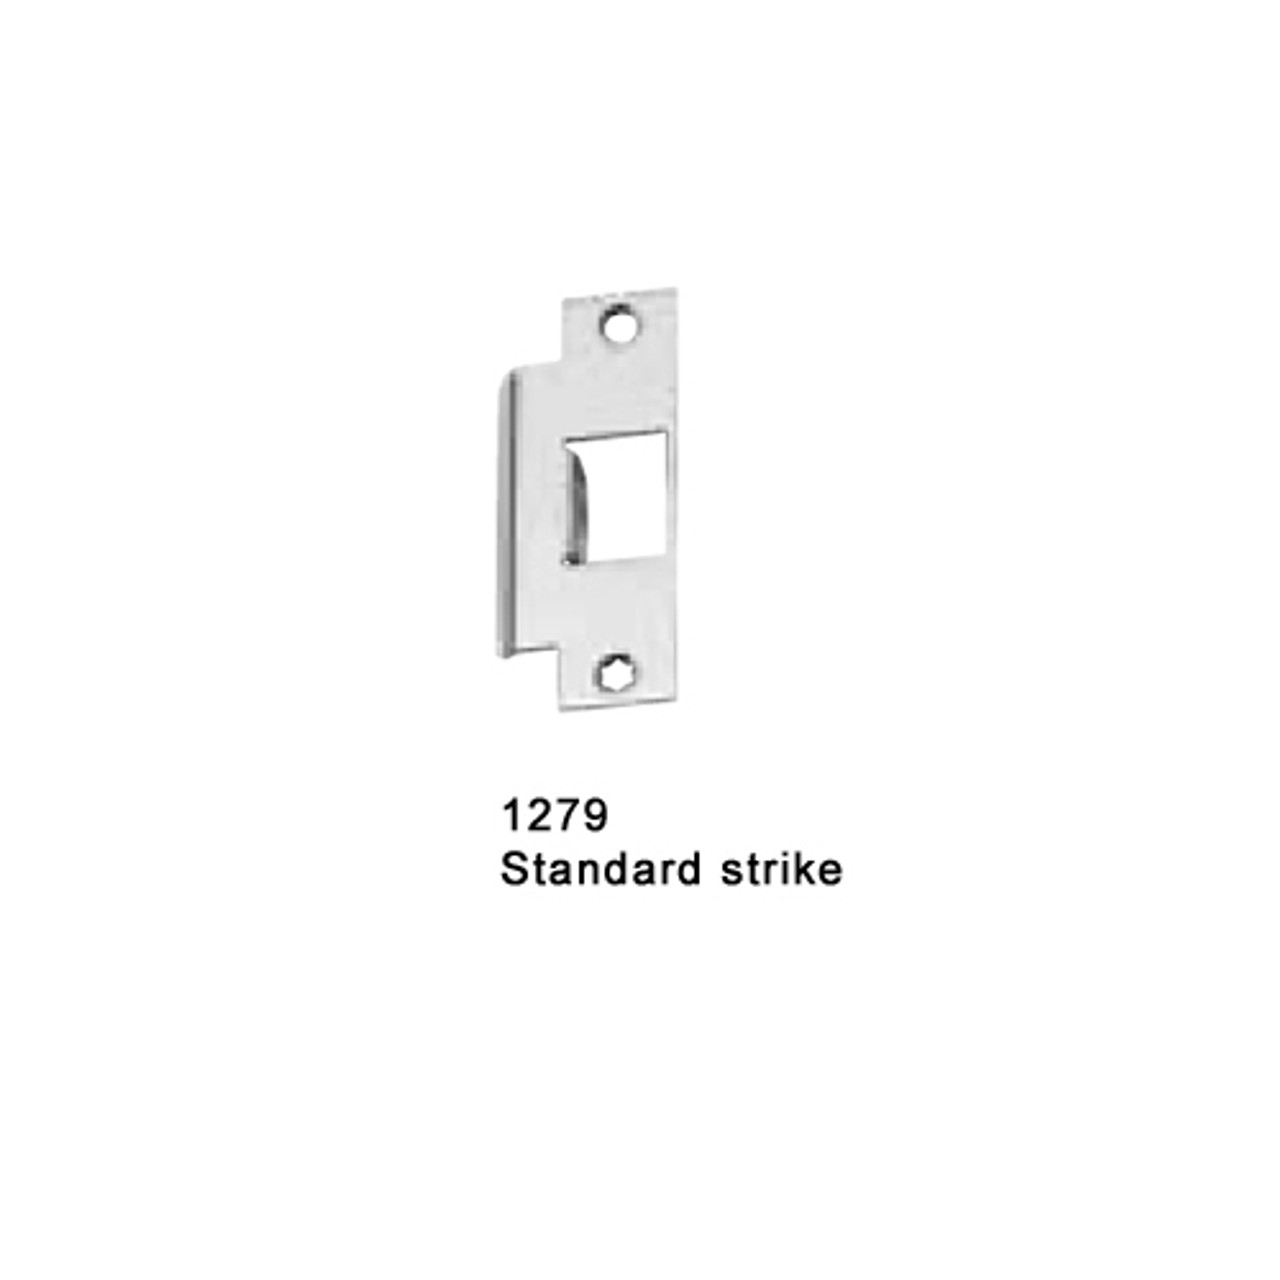 F-25-M-L-BE-Dane-US26D-3-RHR Falcon 25 Series Fire Rated Mortise Lock Devices 510L-BE Dane Lever Trim with Blank Escutcheon in Satin Chrome